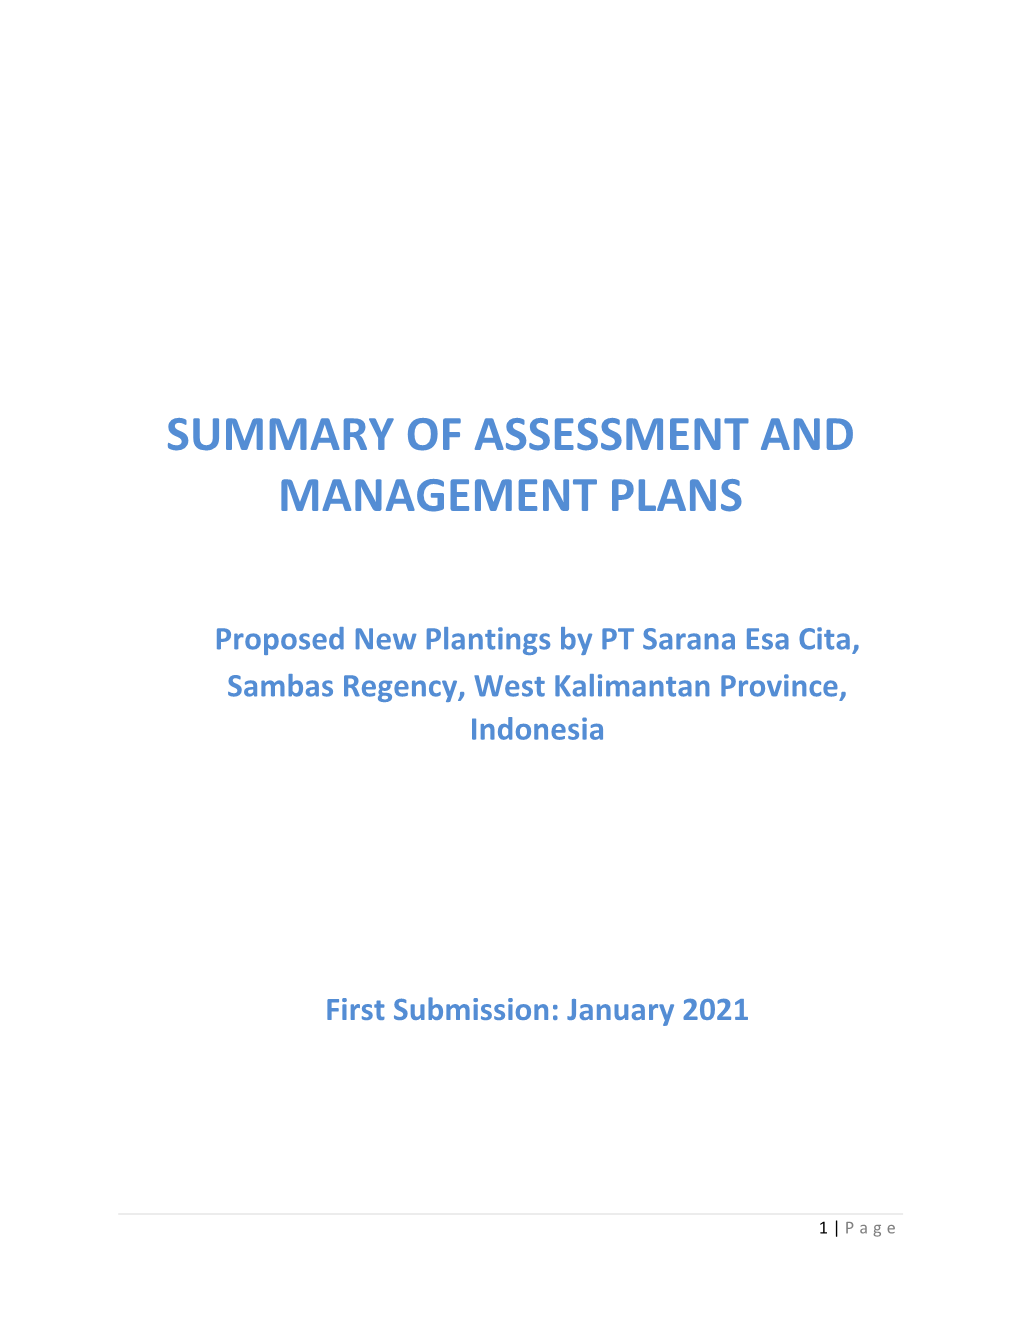 Summary of Assessment and Management Plans